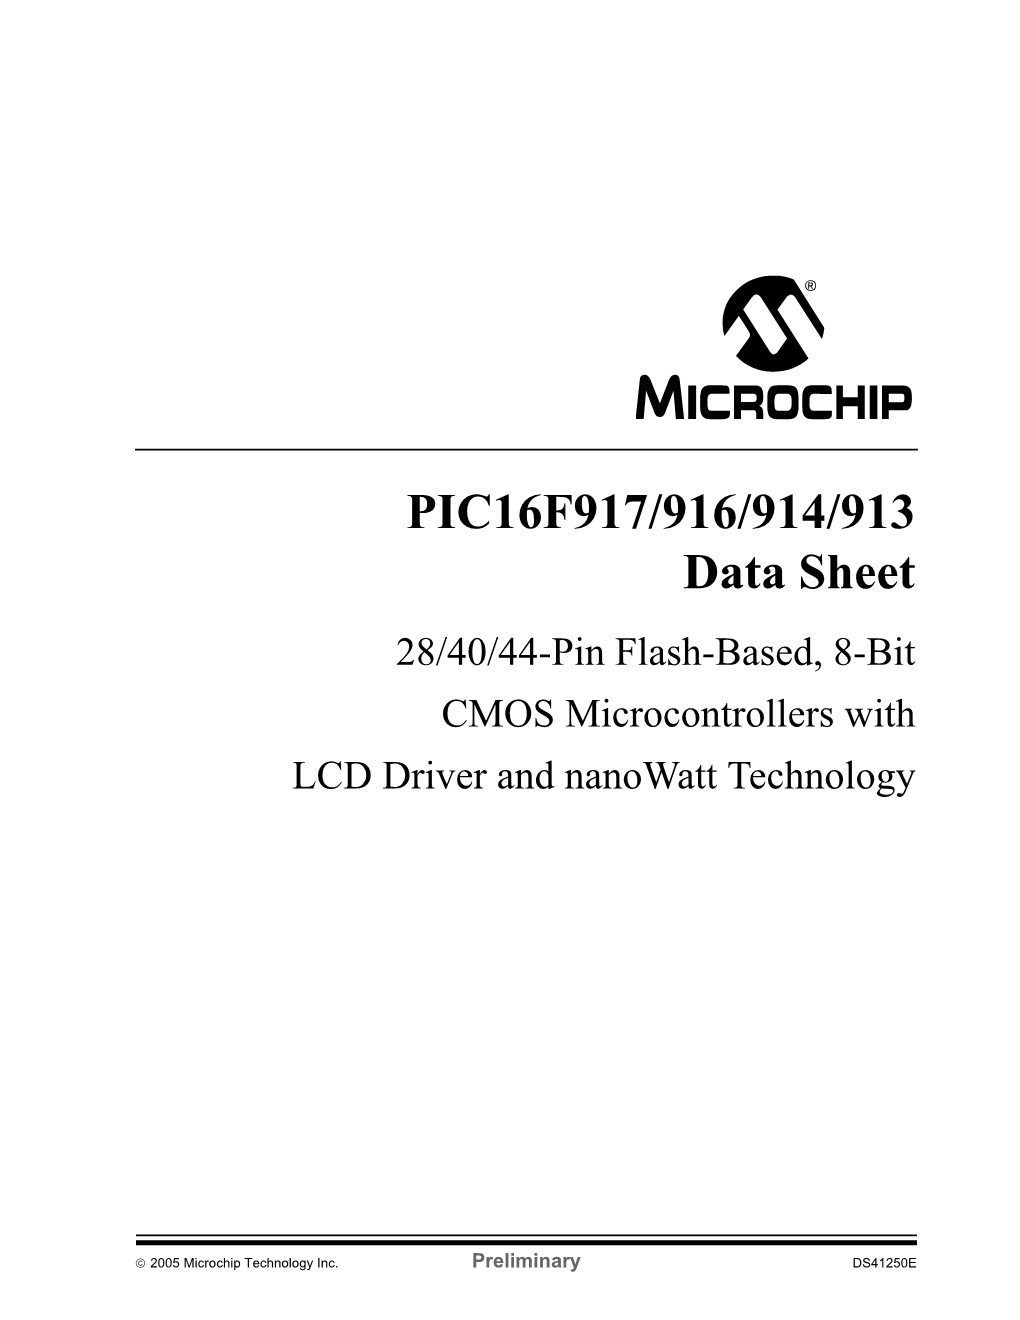 PIC16F917/916/914/913 Data Sheet 28/40/44-Pin Flash-Based, 8-Bit CMOS Microcontrollers with LCD Driver and Nanowatt Technology